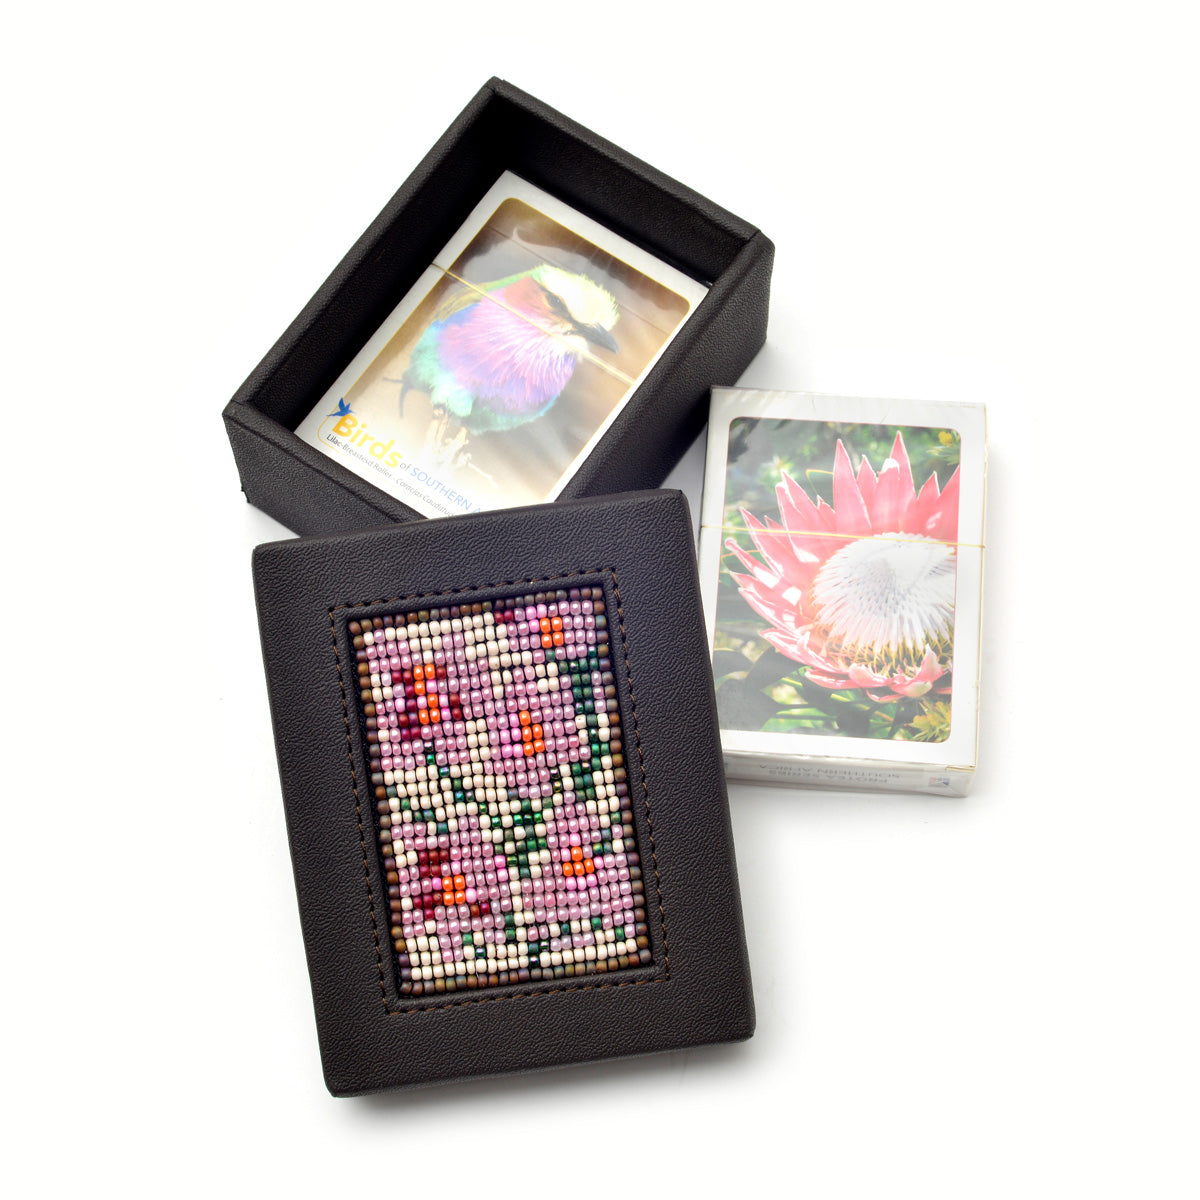 Beaded Leather Card Box with 2 packs of cards - Various Designs